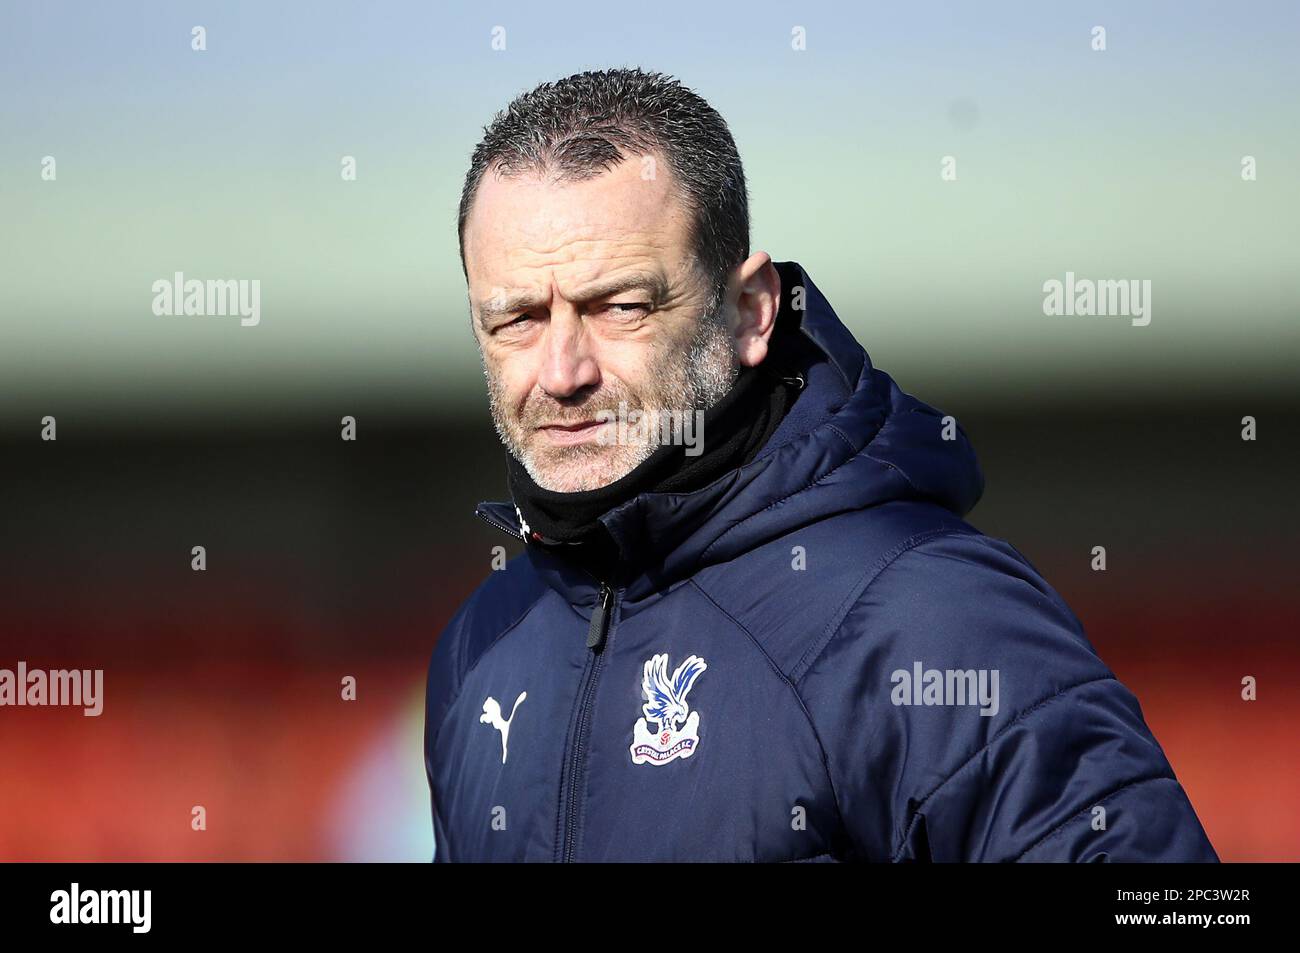 File photo dated 28-02-2021 of Crystal Palace manager Dean Davenport. Manager Dean Davenport is one of three members of the Crystal Palace women’s team staff to have been suspended pending an investigation, the PA news agency understands. Issue date: Monday March 13, 2023. Stock Photo